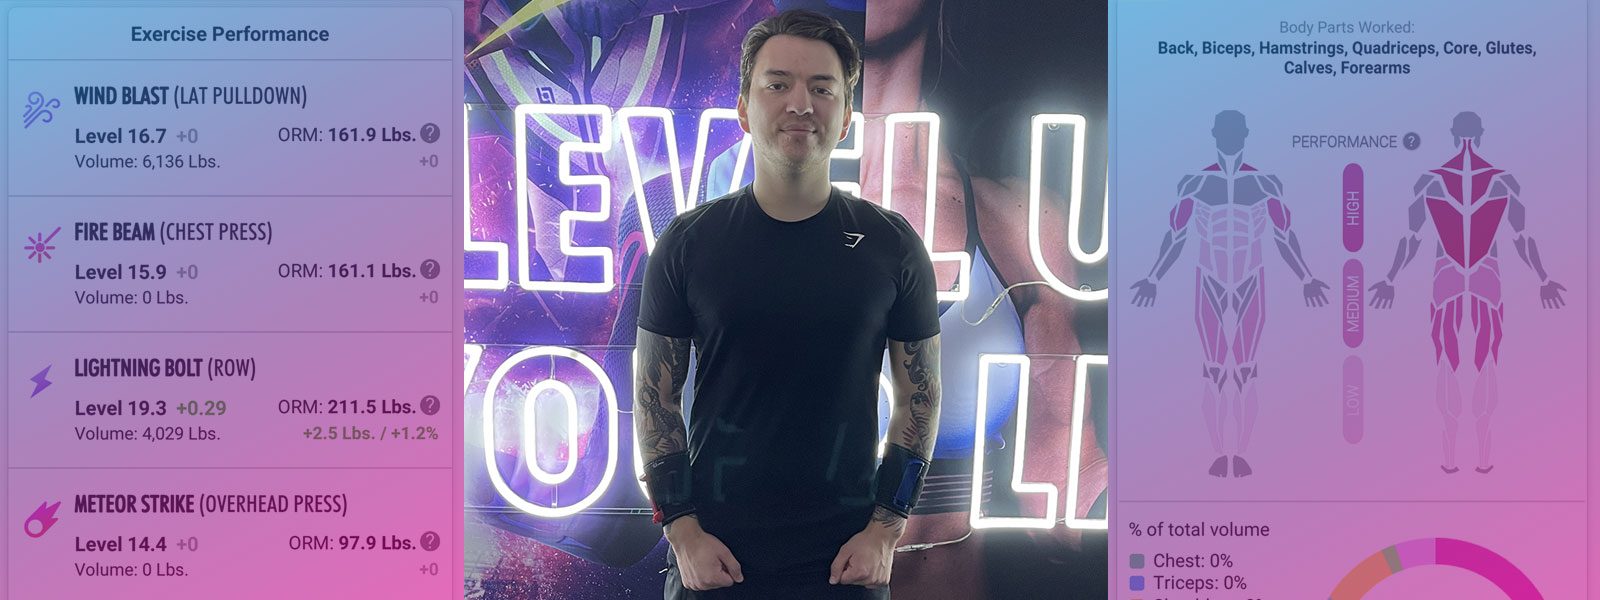 Passion For VR Helps Black Box Fitness Developer Change People’s Lives As Well As His Own